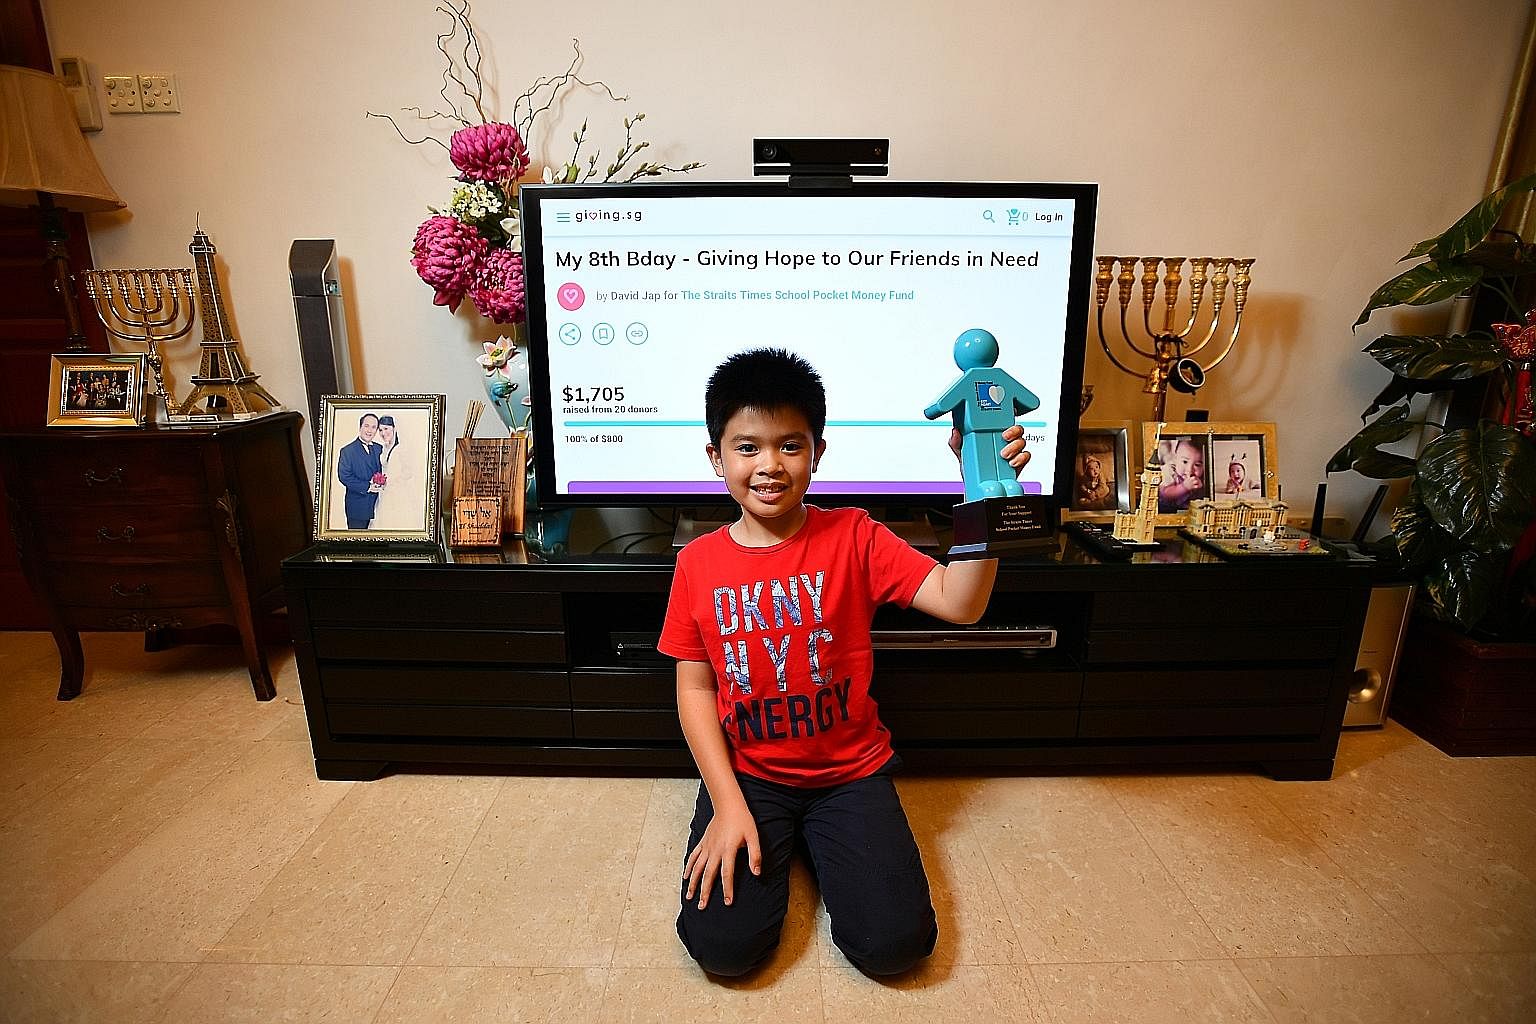 Primary 2 student David Jap, seen here at home, set up a crowdfunding page on Giving.sg to raise funds for the Straits Times School Pocket Money Fund, which has raised more than $1,700. Crowdfunding has taken off here in a big way in the past few yea